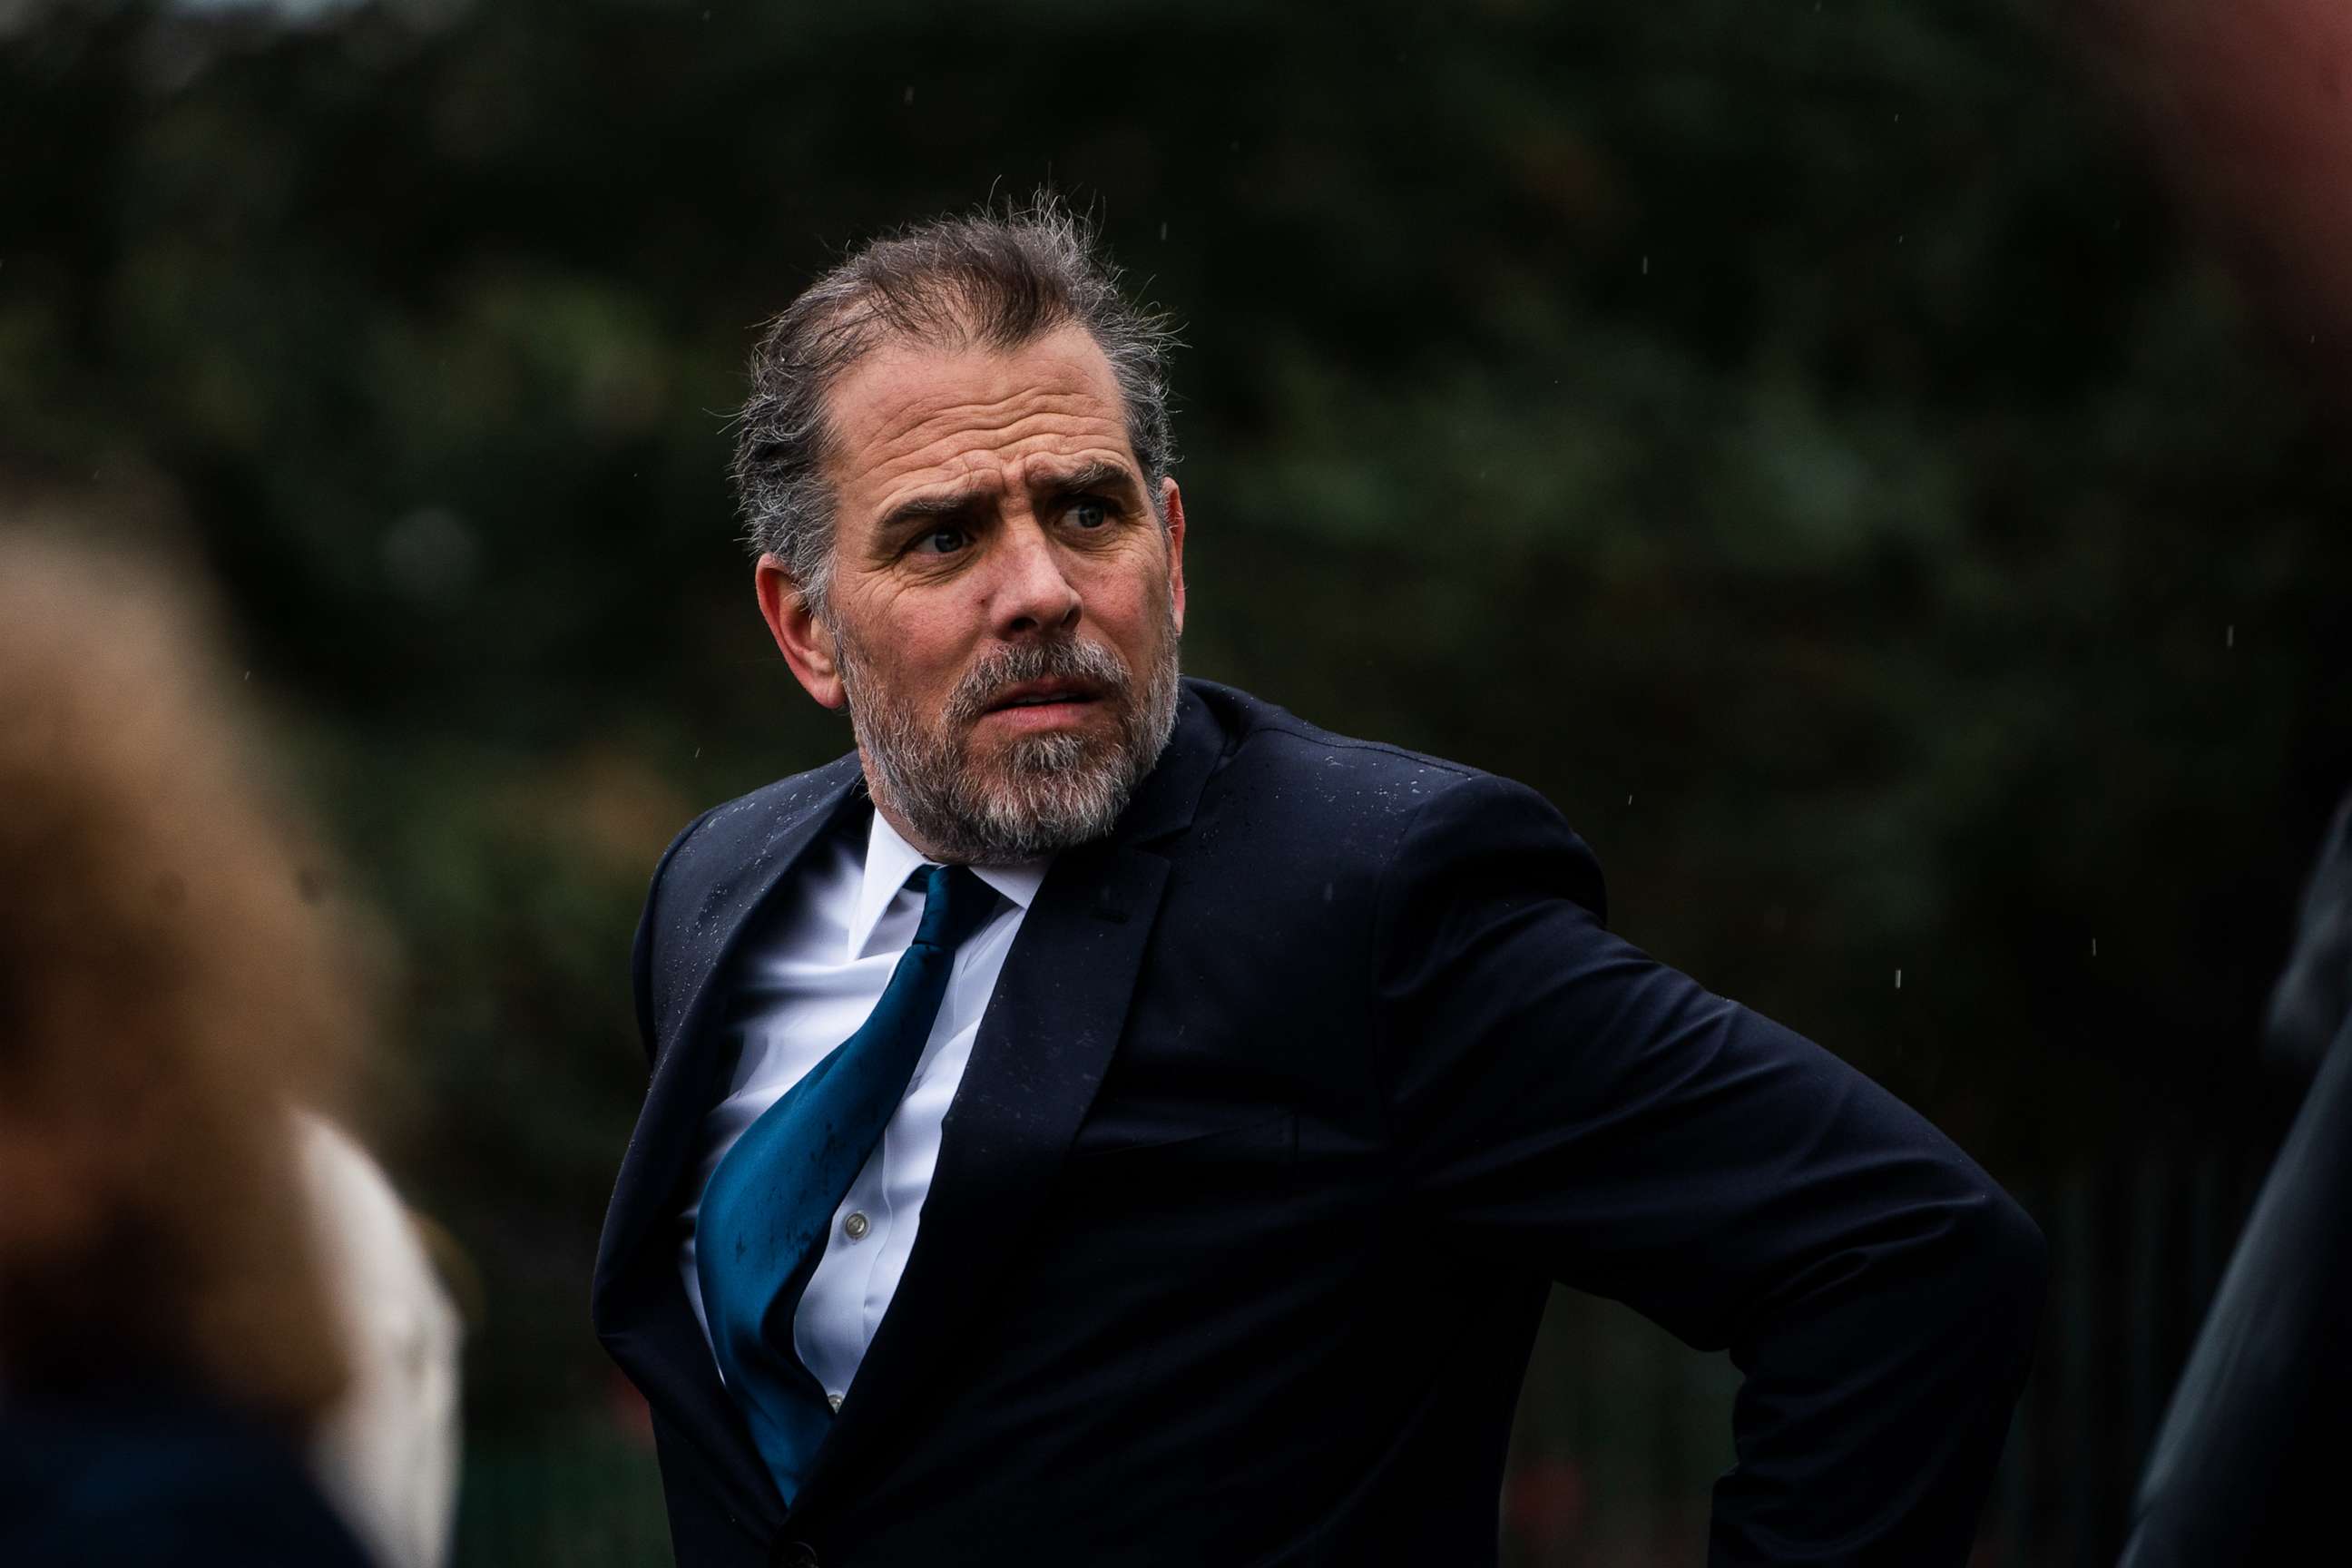 PHOTO: Hunter Biden during the White House Easter Egg Roll on the South Lawn, April 18, 2022.